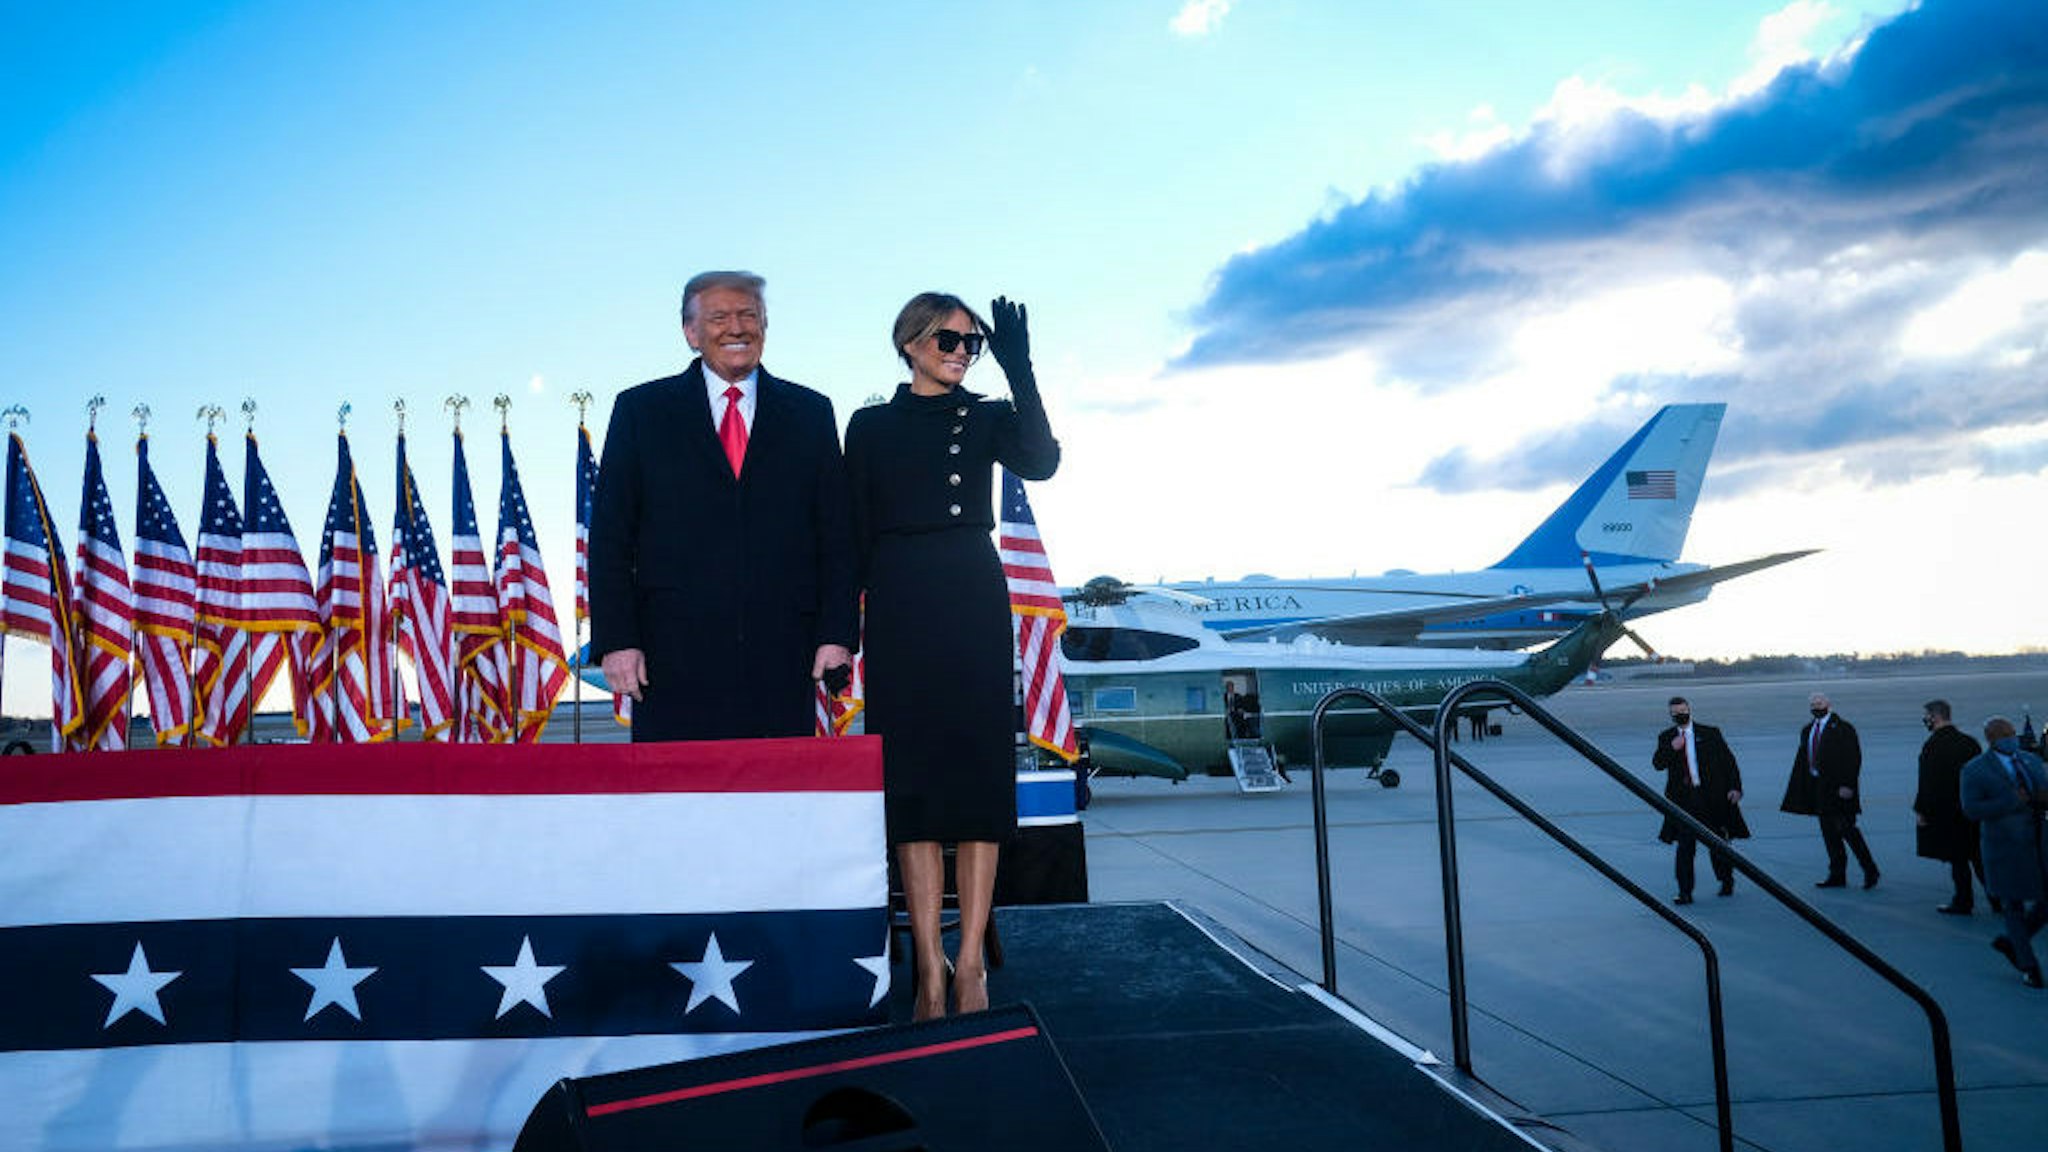 President Donald Trump speaks to supporters at Joint Base Andrews before boarding Air Force One for his last time as President on January 20, 2021. Trump is traveling to his Mar-a-Lago Club in Palm Beach, Fla. (photo by Pete Marovich for The New York Times)